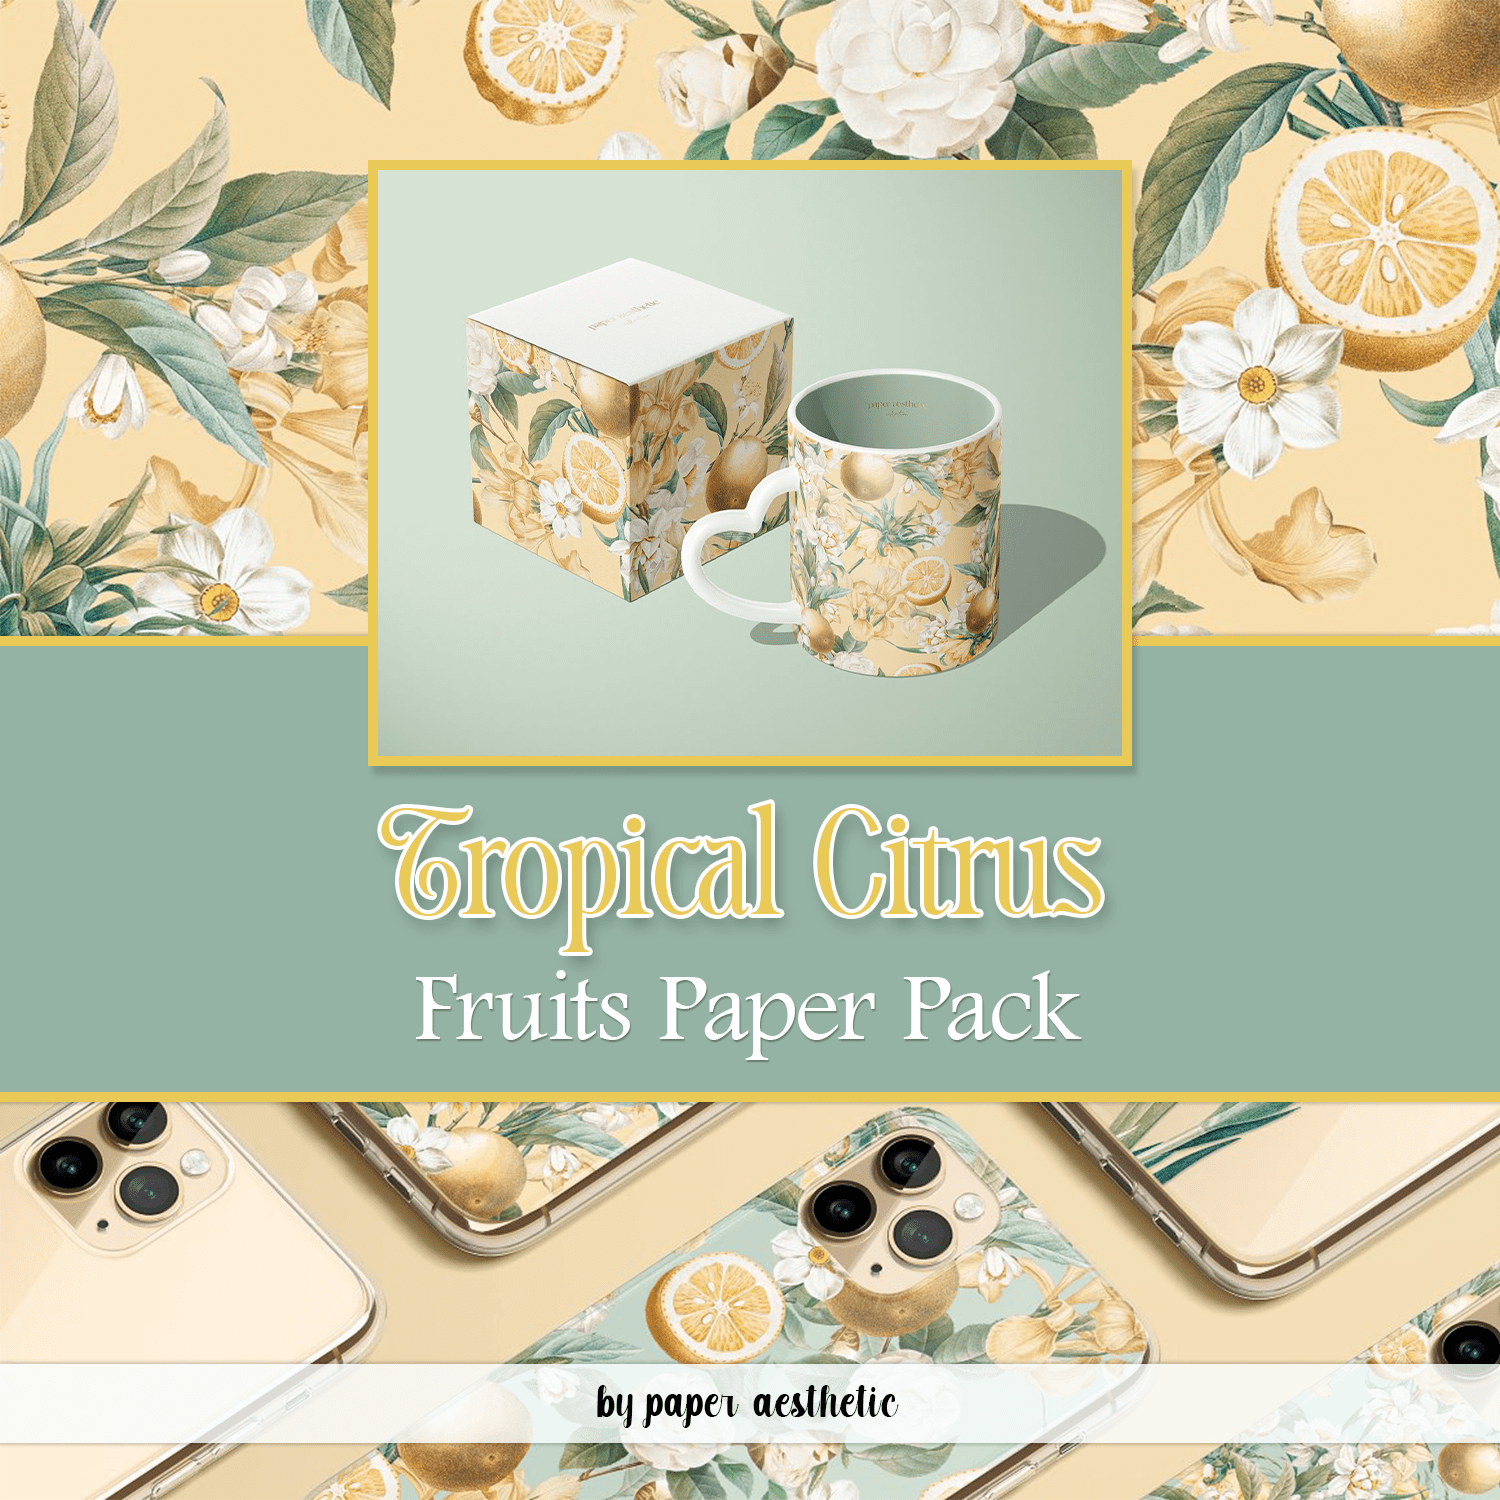 Tropical Citrus Fruits Paper Pack cover.